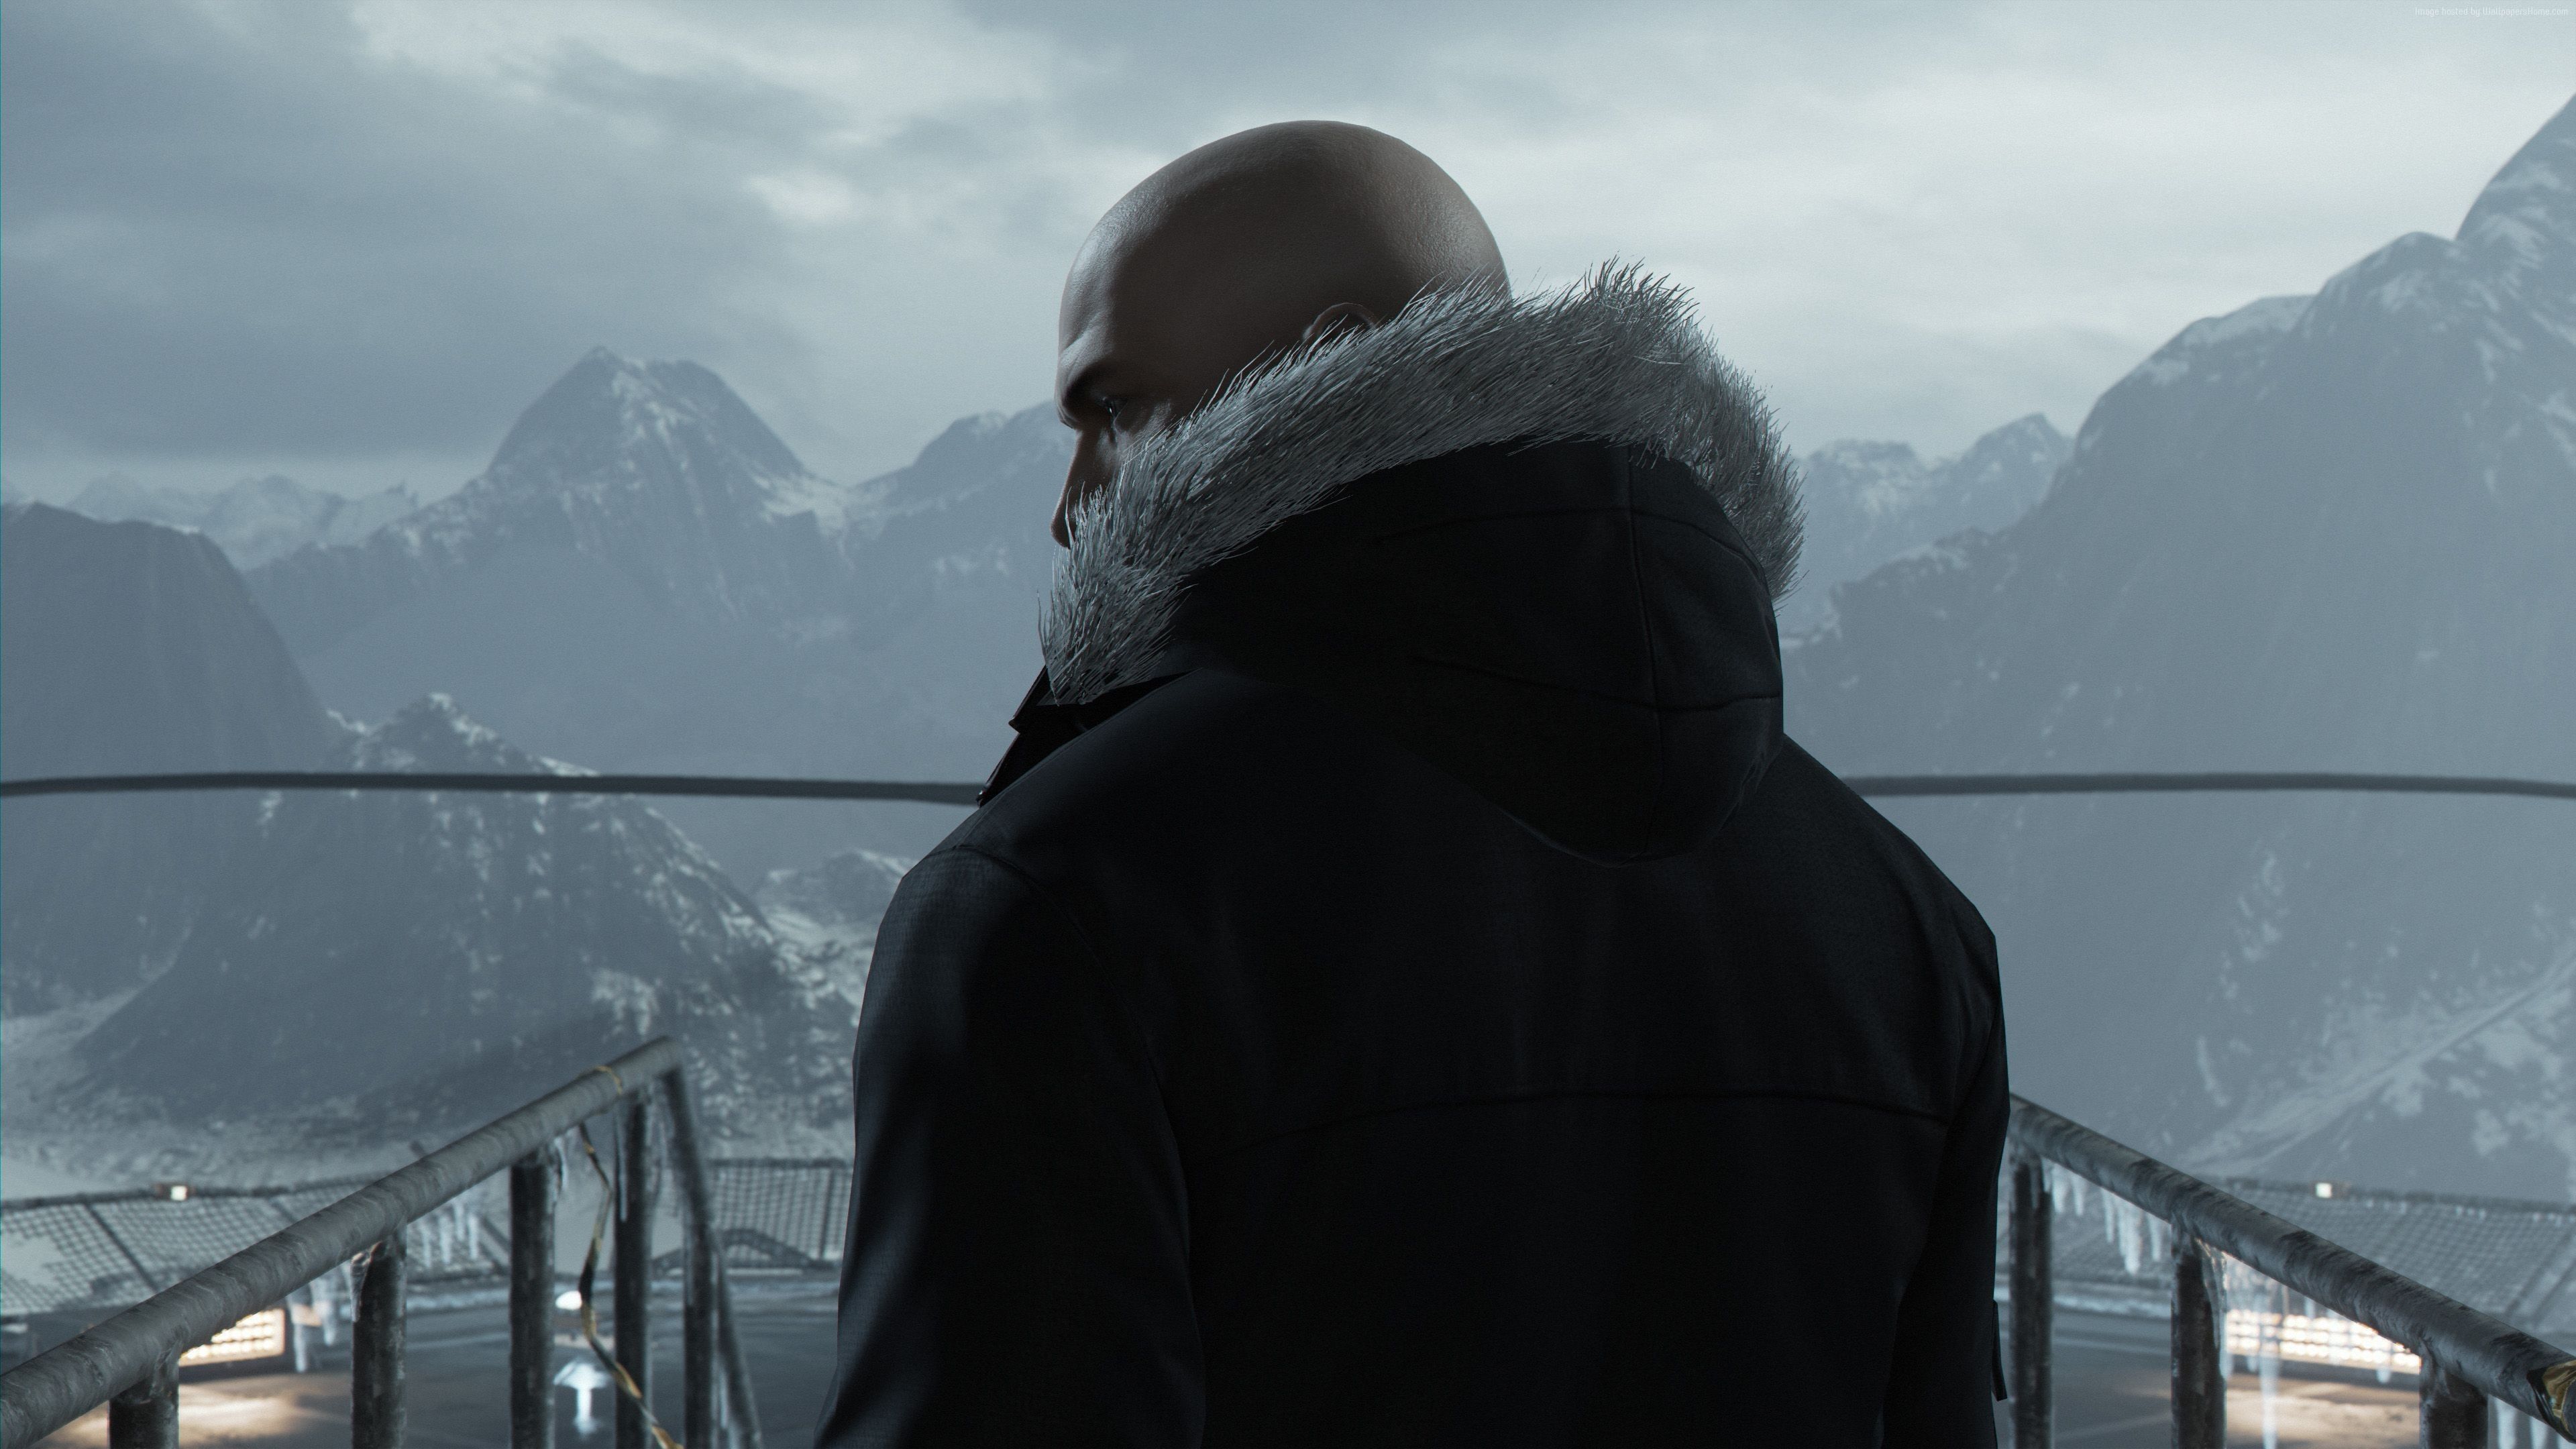 Xbox One X Hitman Enhancements Detailed; High Detailed Native 4K Mode, High Framerate 60FPS Mode, HDR & More